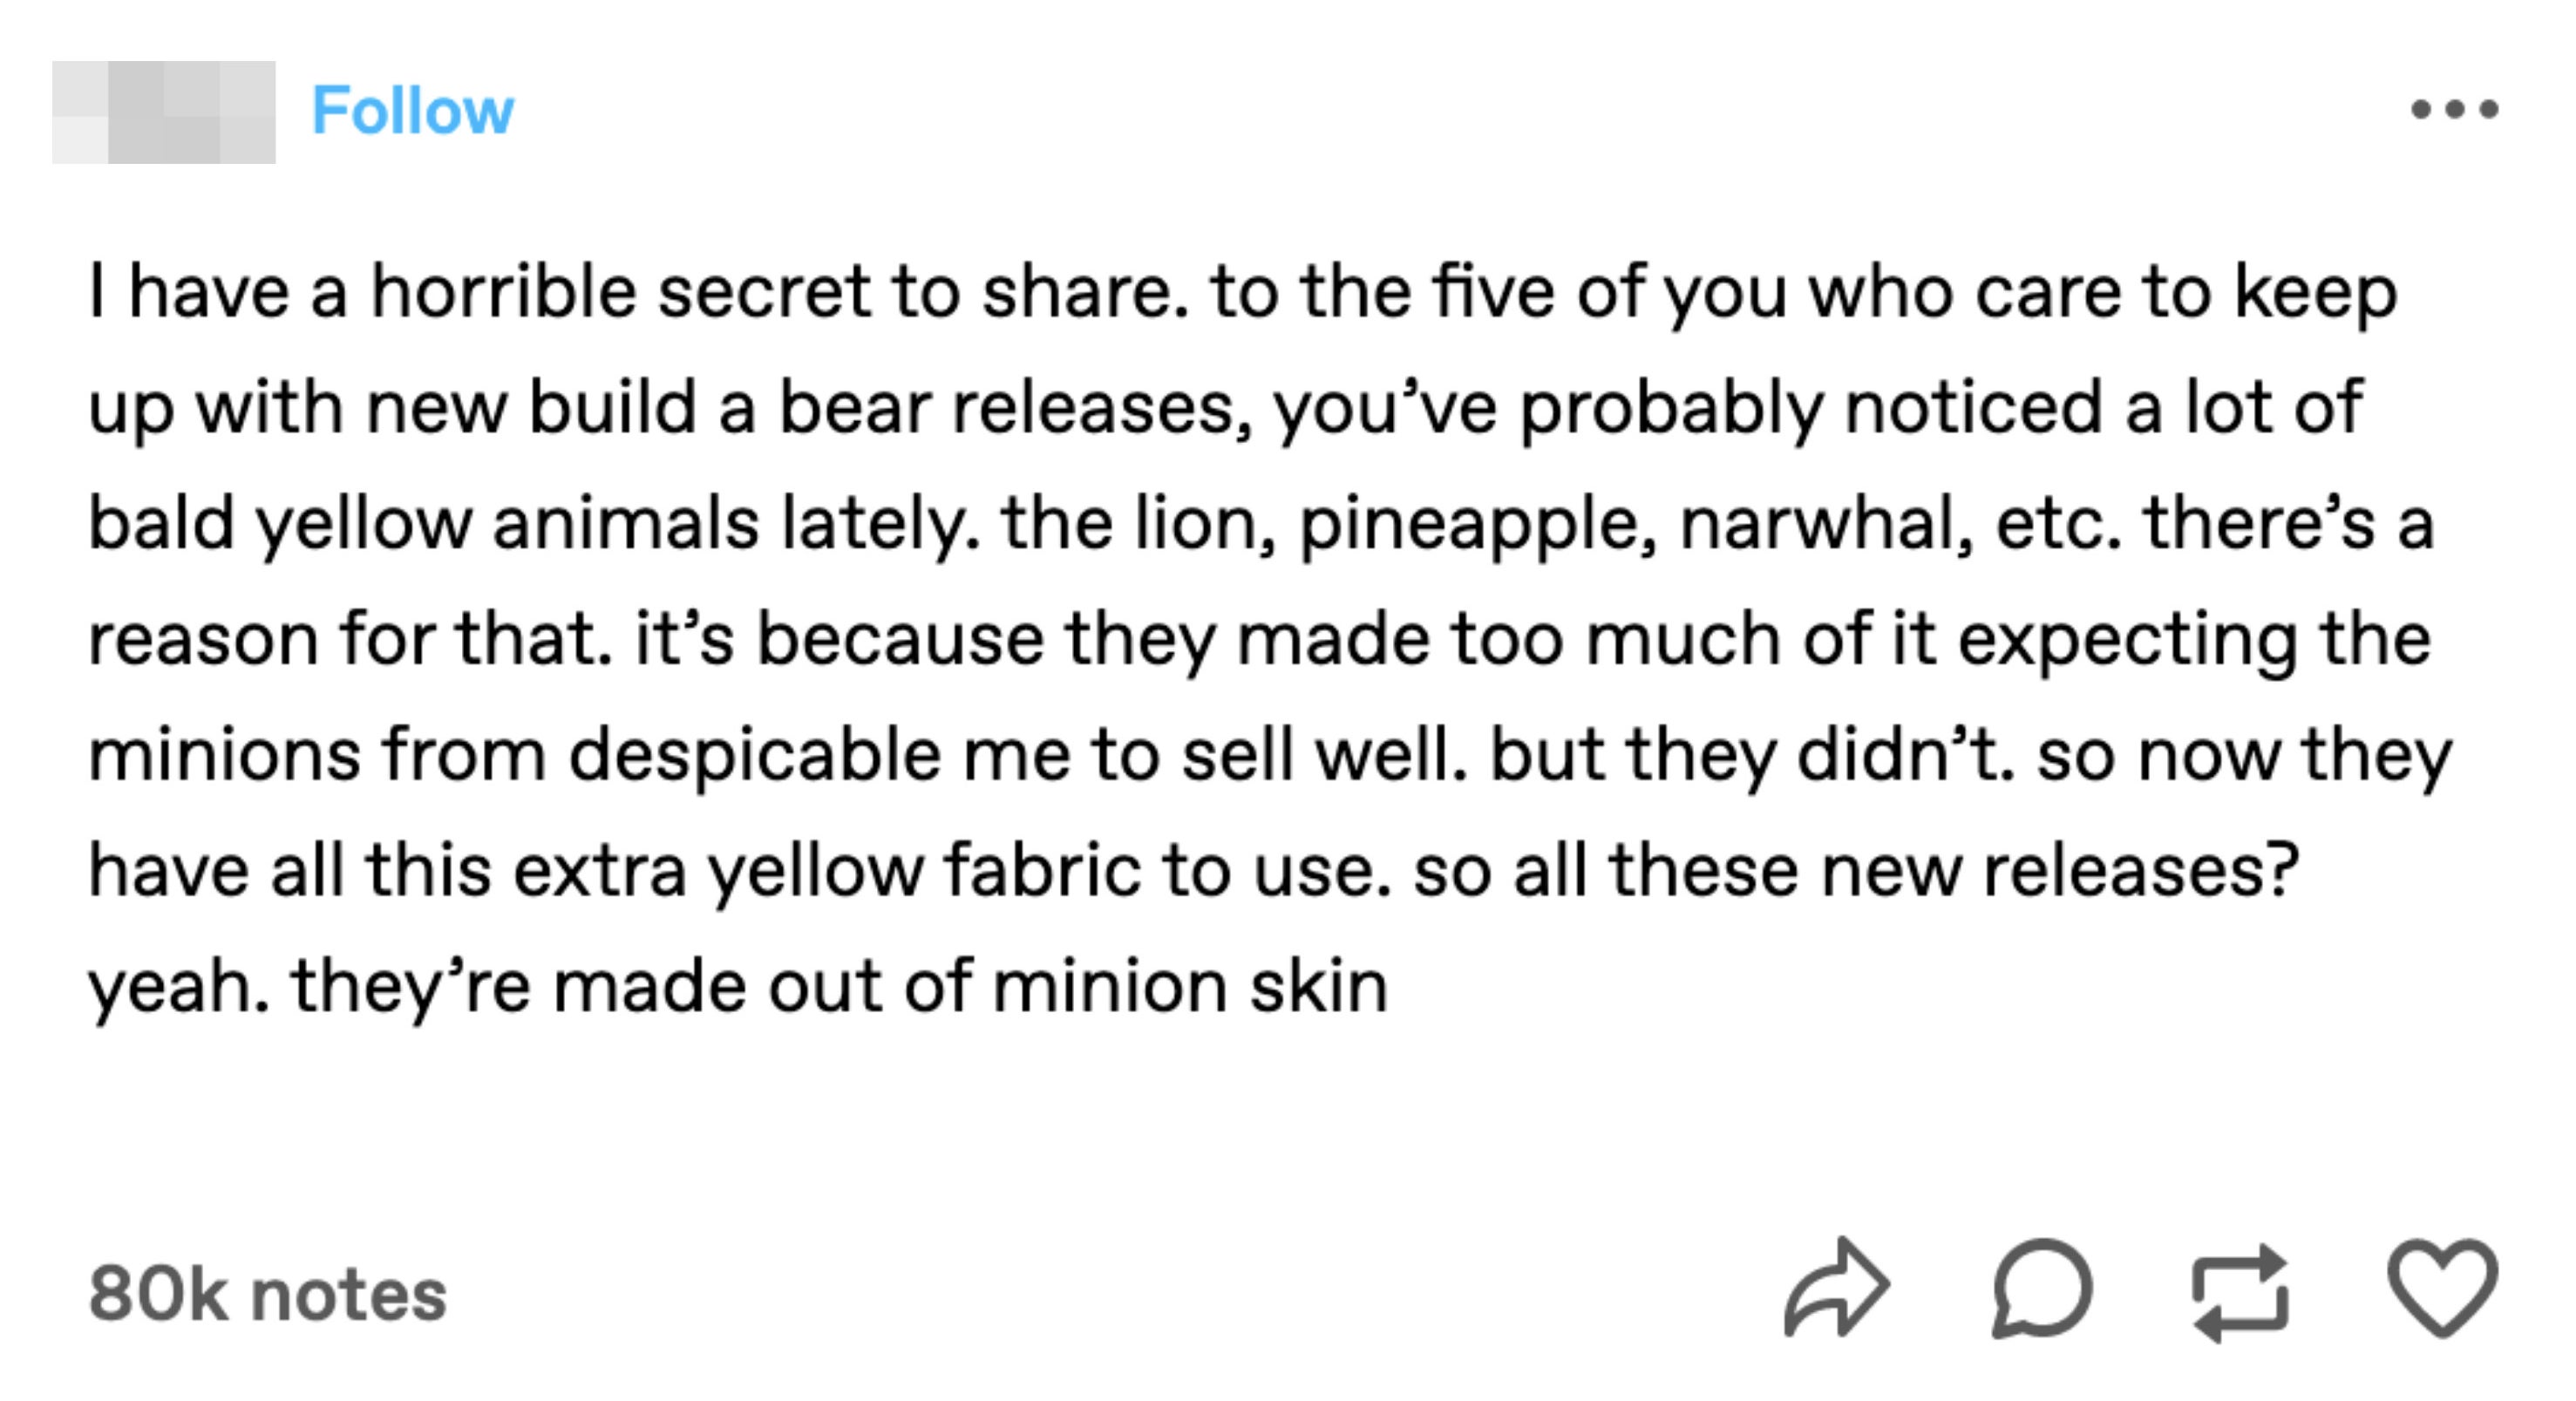 someone informing people about build a bear releases due to fabric surplus from minions run